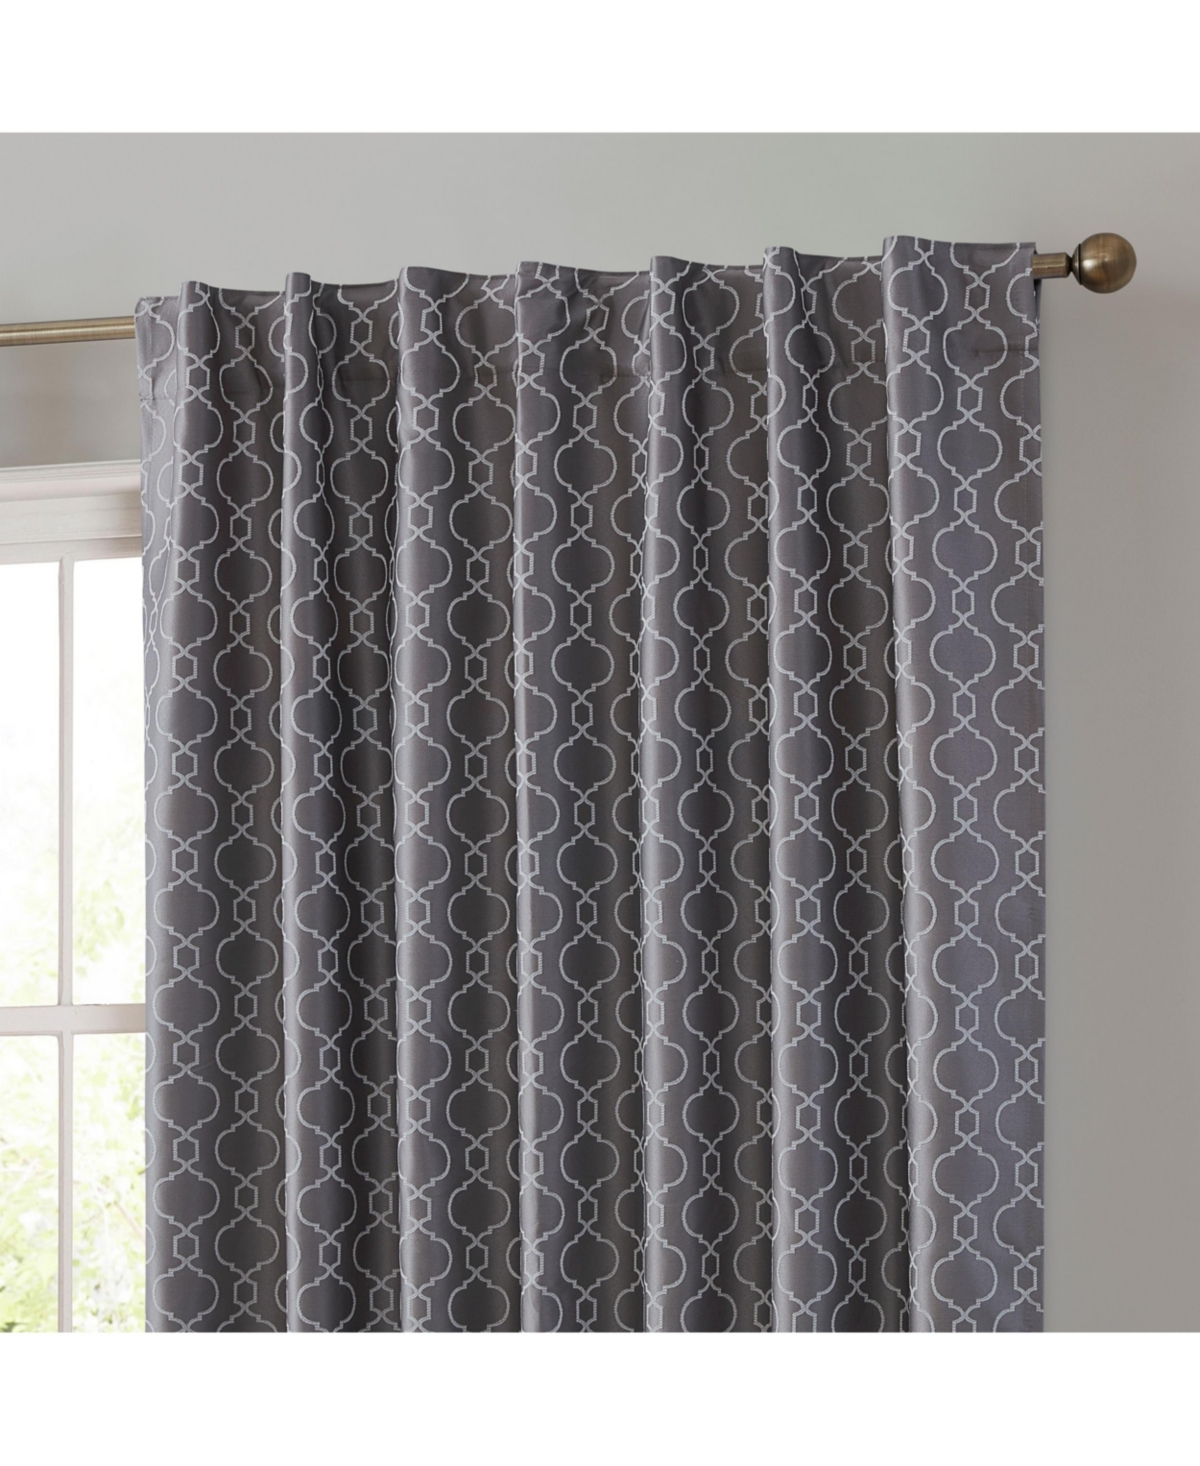 Franklin Moroccan 100% Complete Blackout Thermal Insulated Energy Savings Heat/Cold Blocking Back Tab Rod Pocket Curtain Drapery for Bedroom &